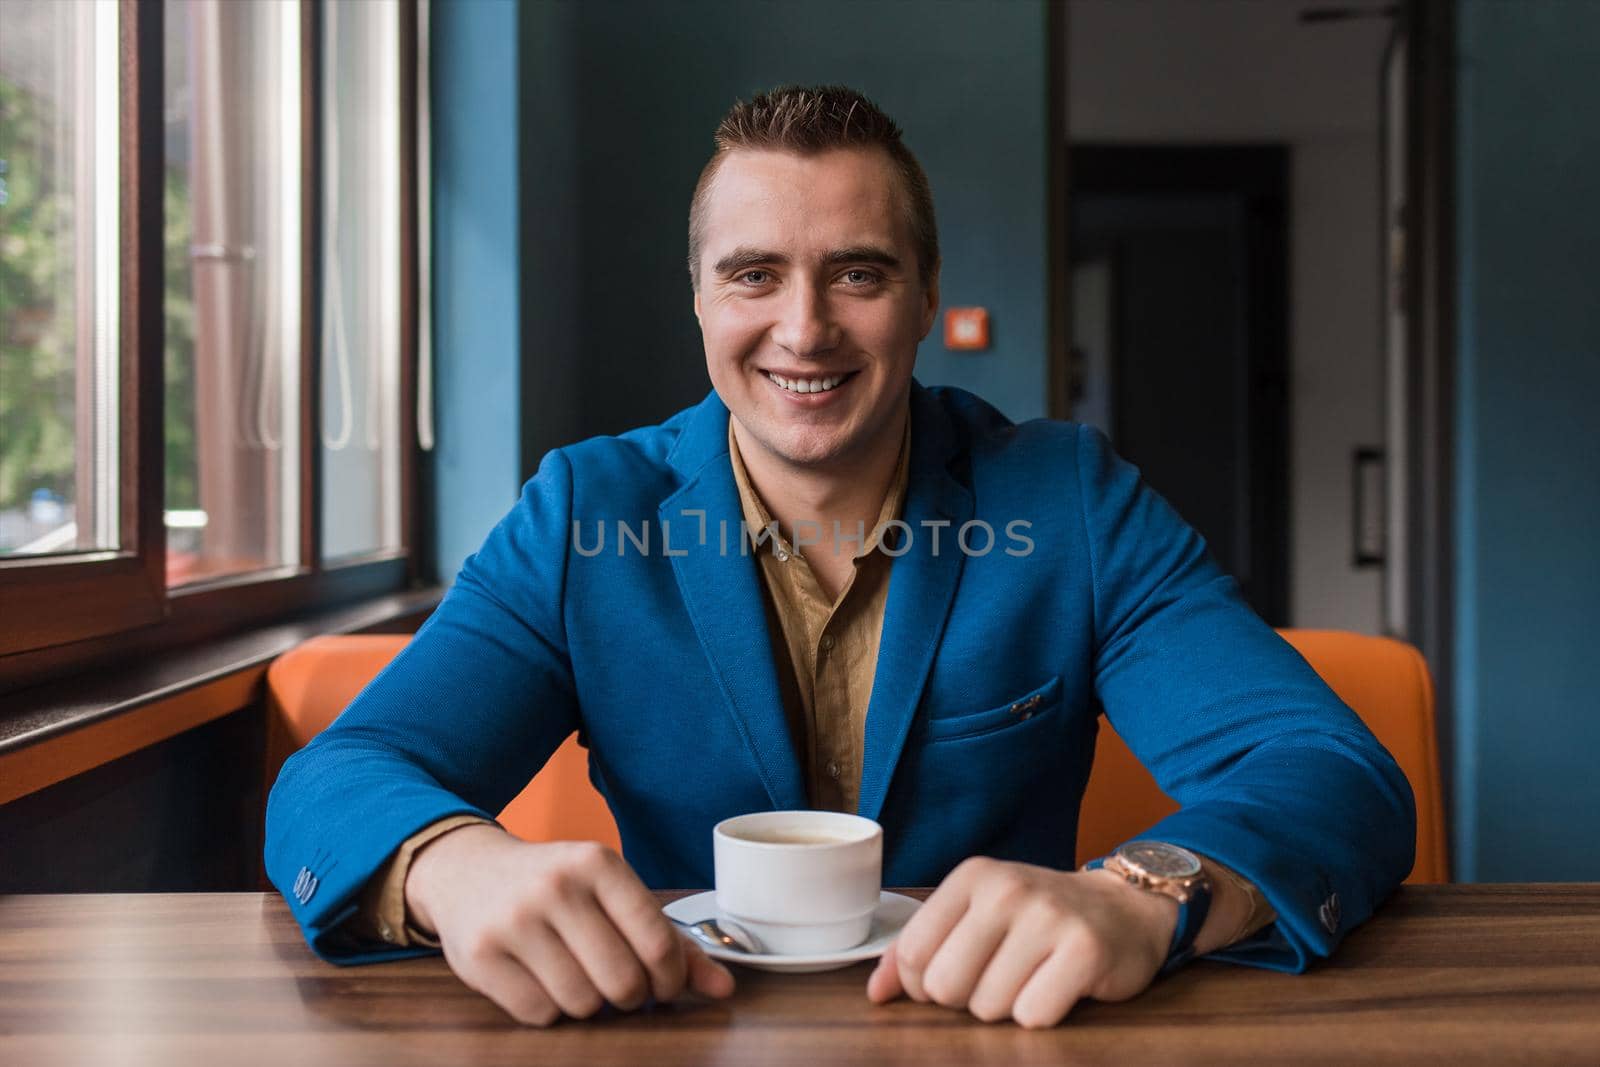 A adult, businessman portrait of Caucasian appearance in a jacket and shirt sits at a table in a cafe with a cup of coffee on a break.